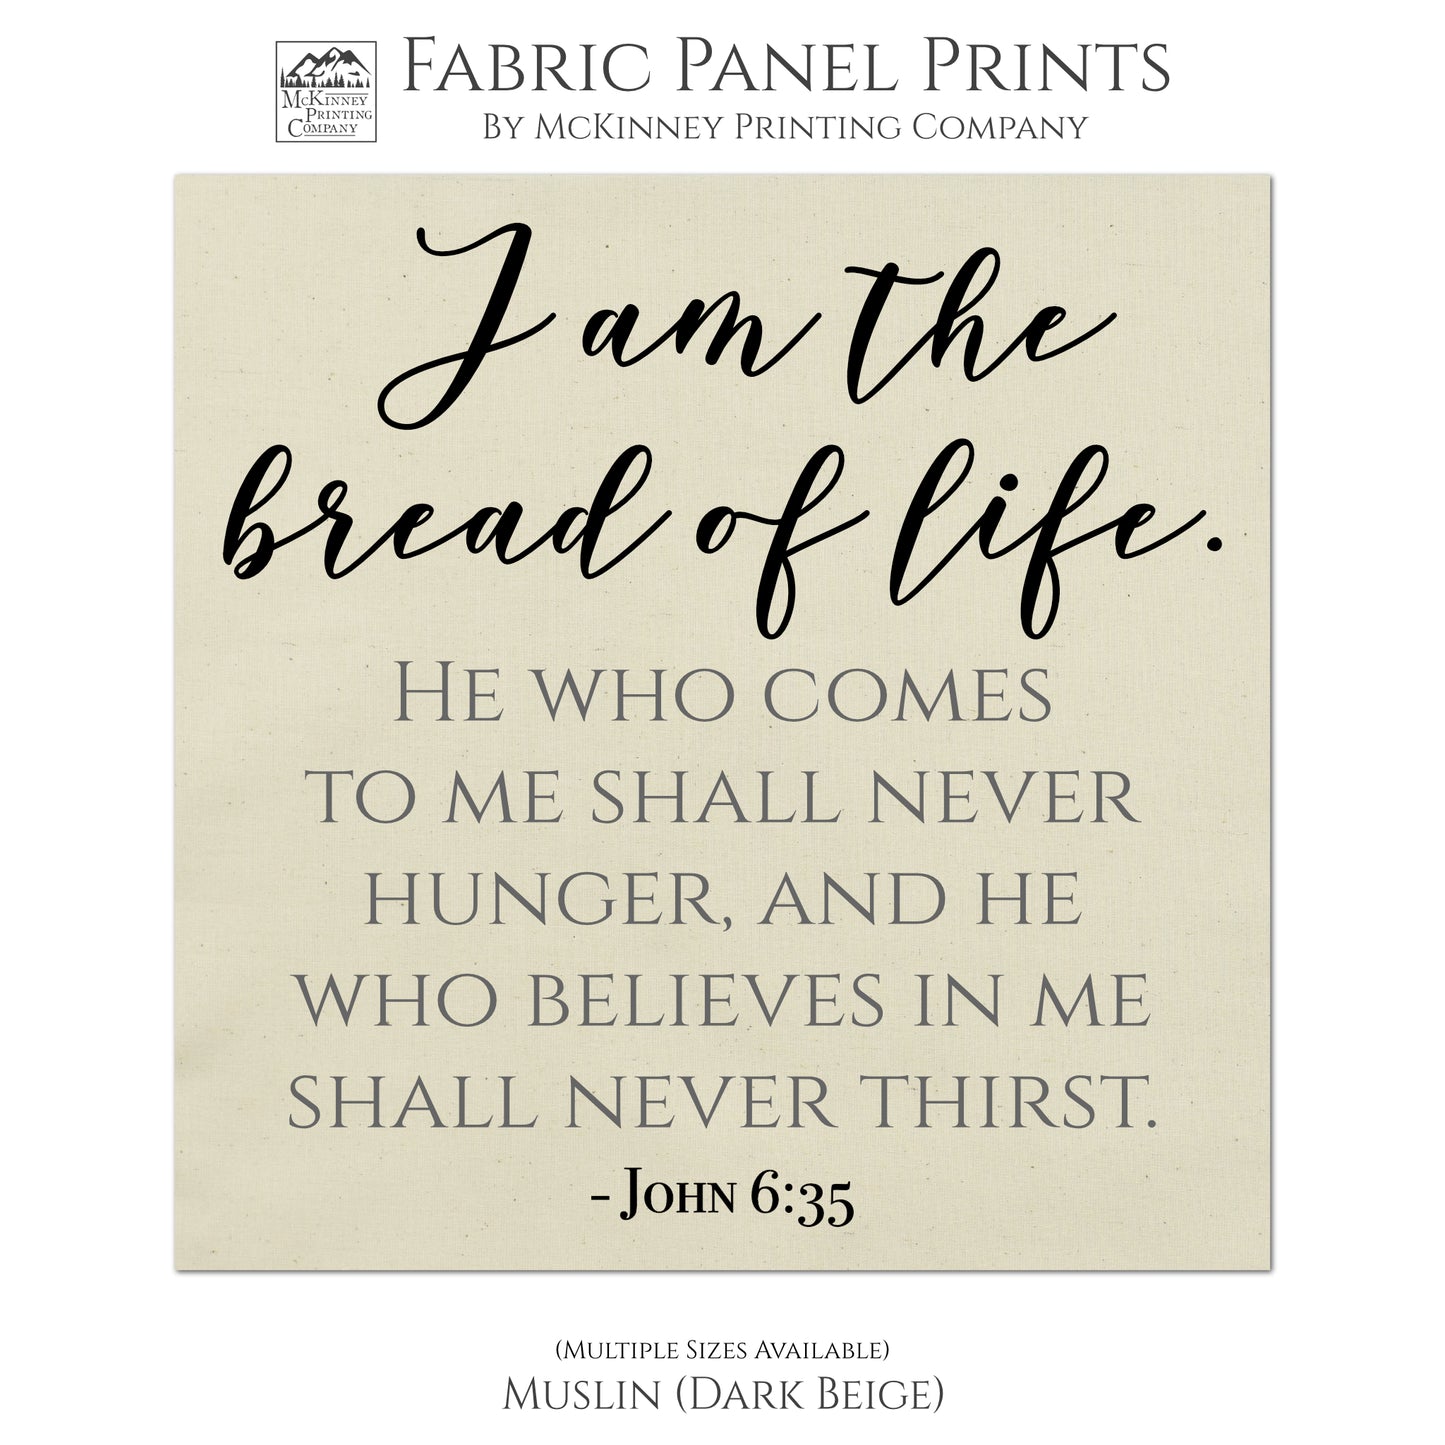 I am the bread of life. He who come to me shall never hunger, and he who believes in me shall never thirst. - John 6:35, Fabric Panel Print, Quilt Block, Wall Hanging, Sewing Craft - Muslin